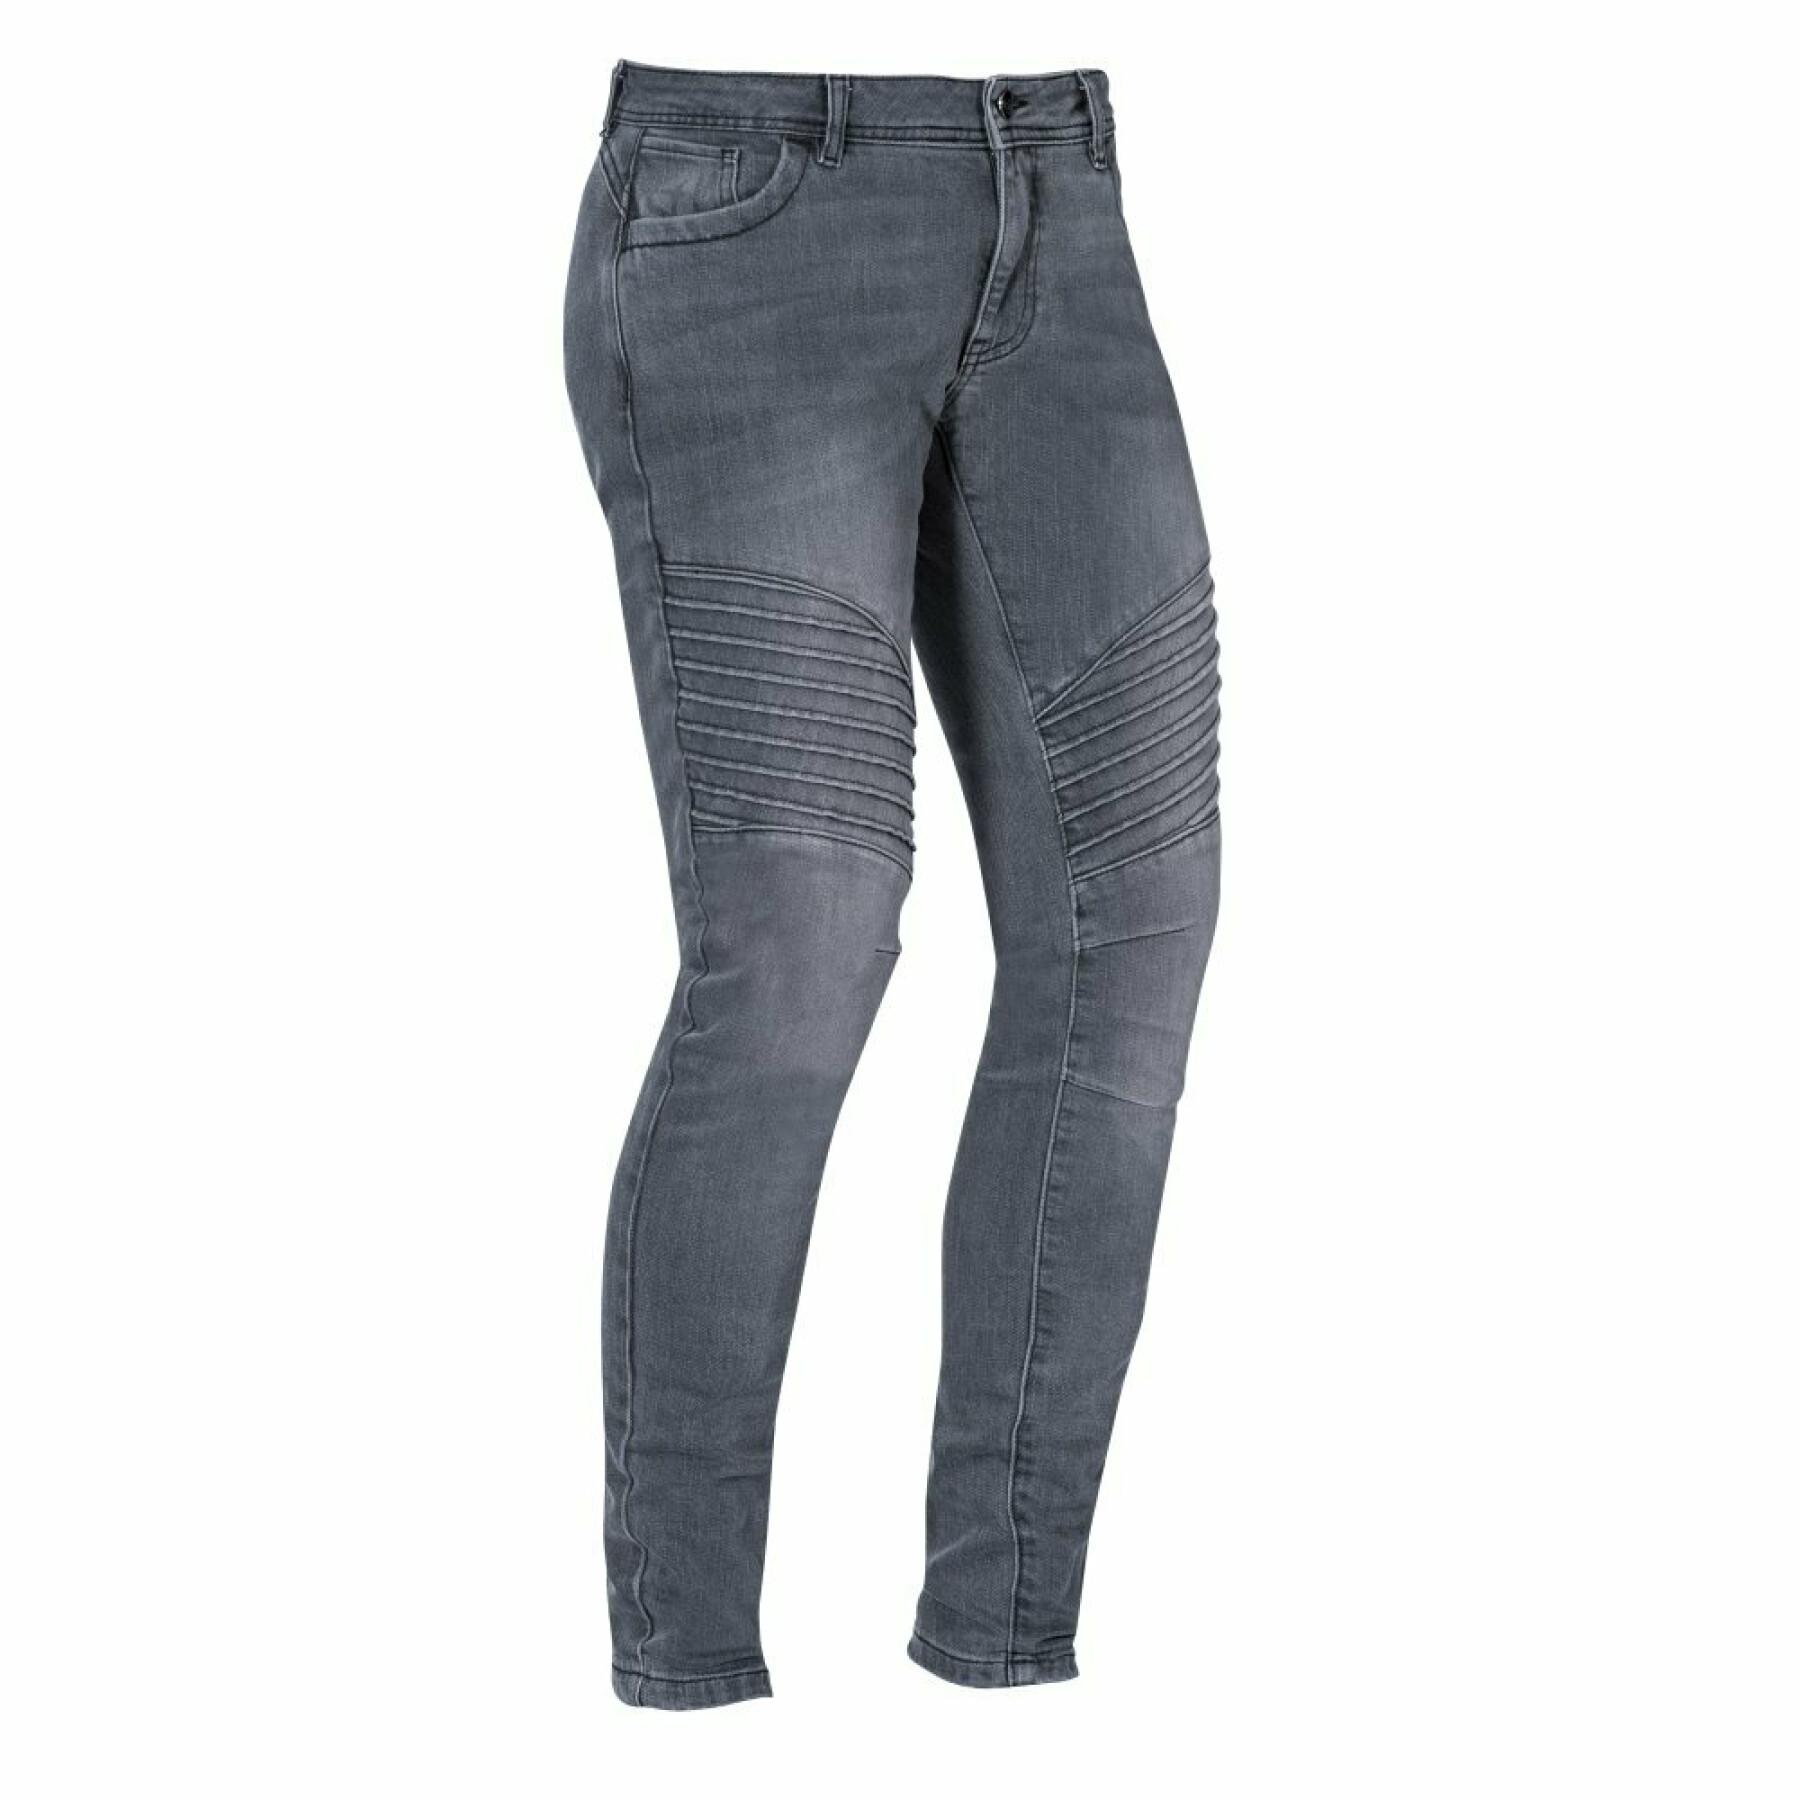 Ixon VICKY Navy Certified Women's Motorcycle Jeans Pants For Sale